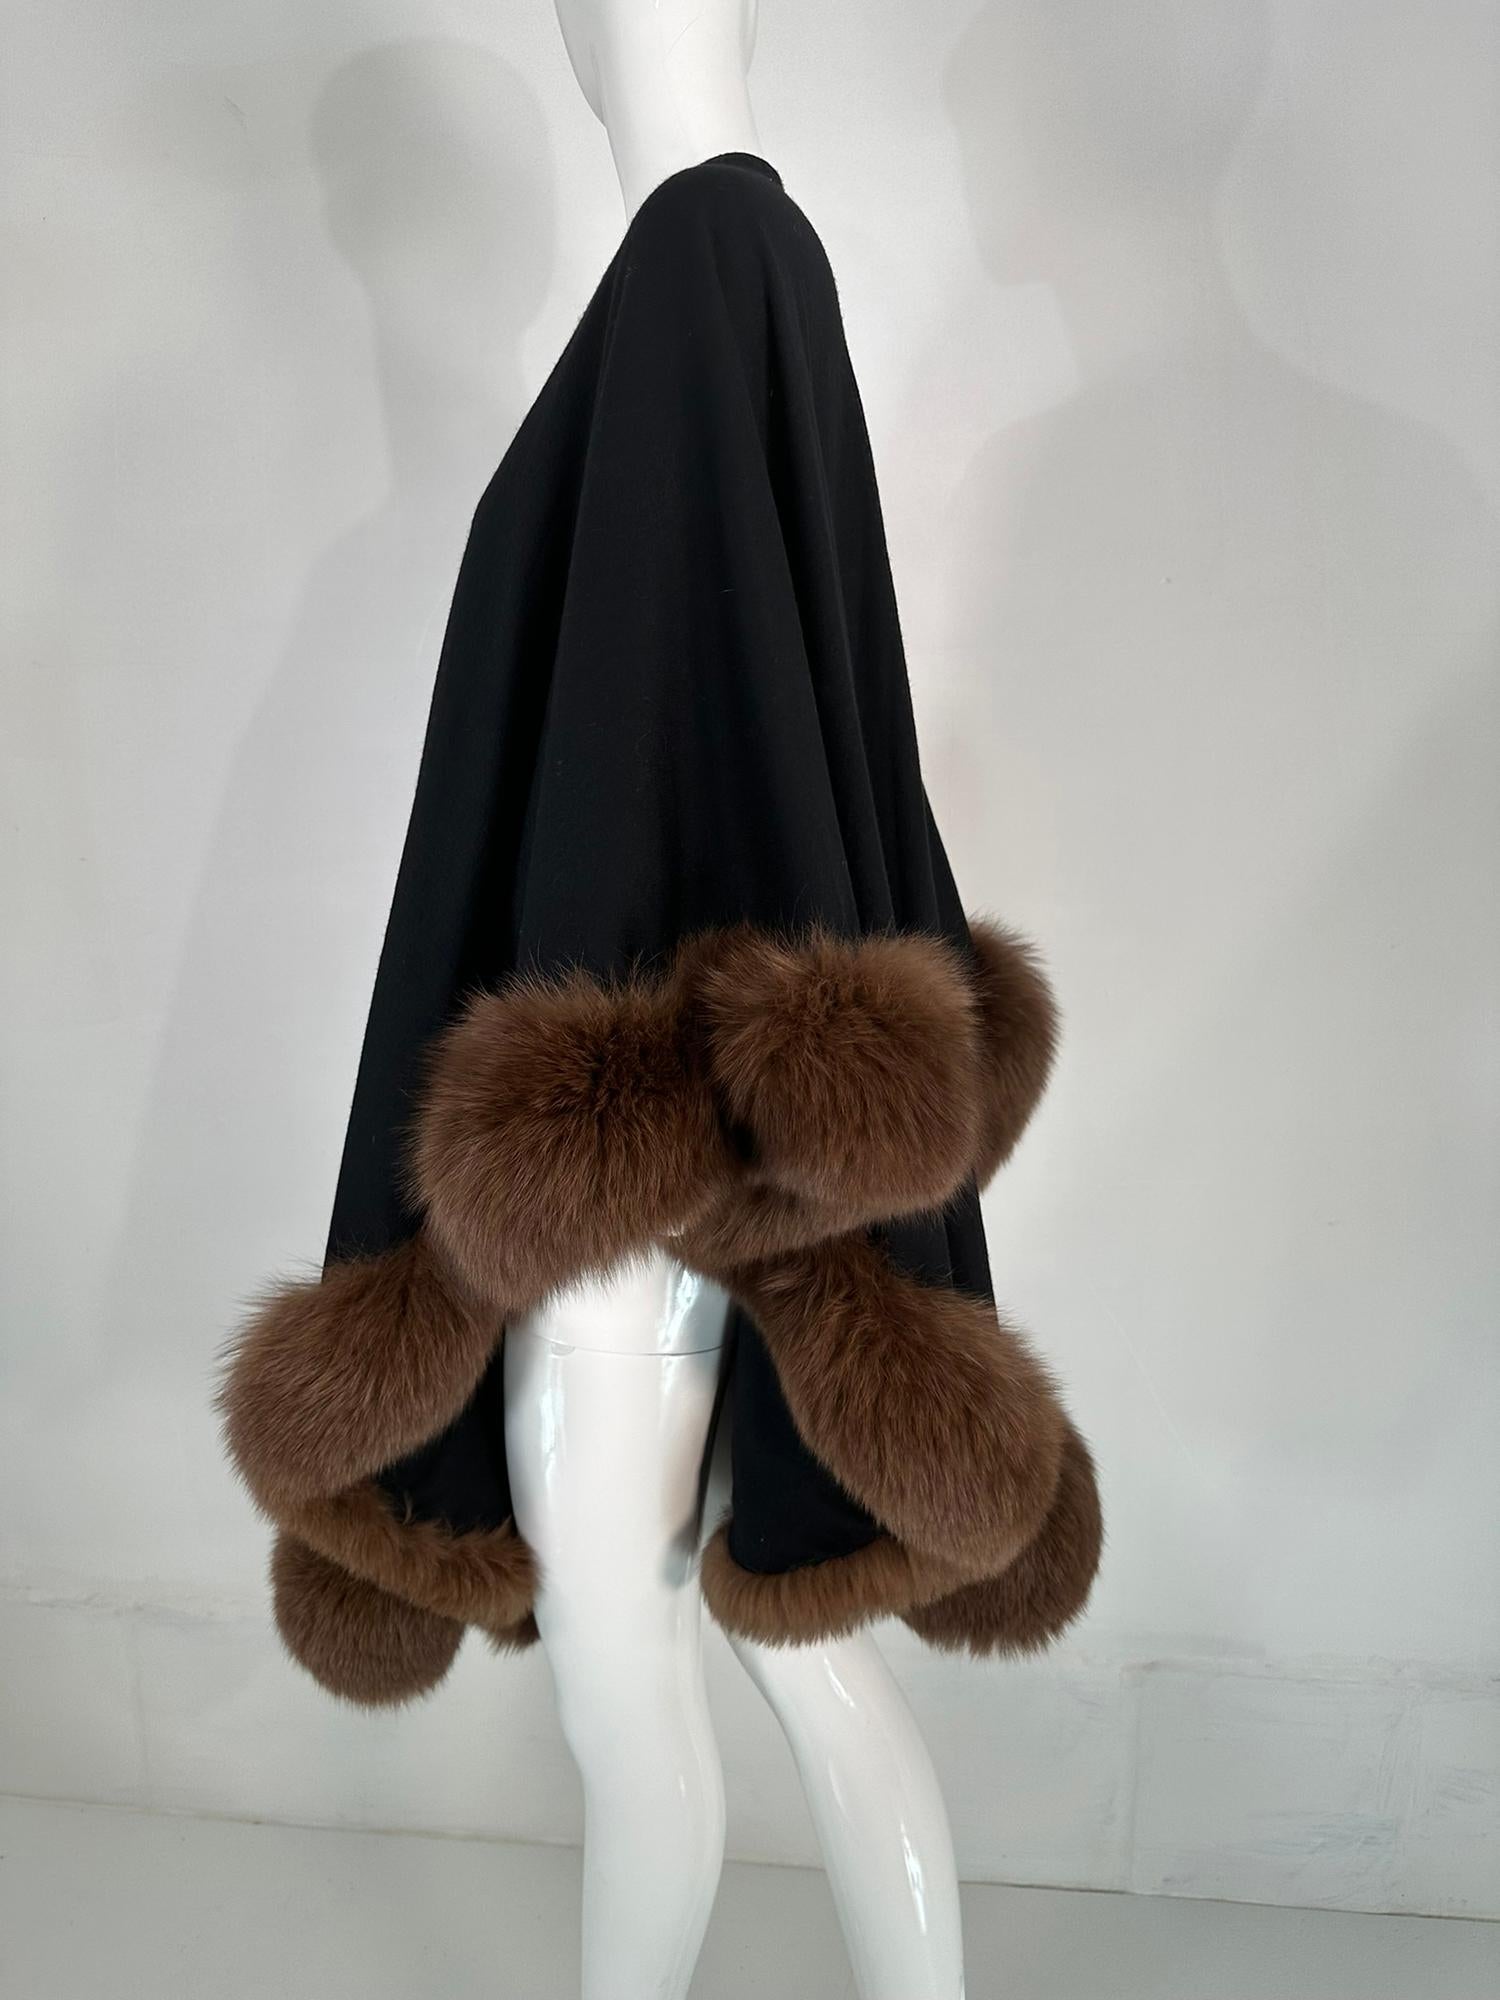 Adrienne Landau Sable Trimmed Black Wool knit Cape/Wrap From the 1990s For Sale 1